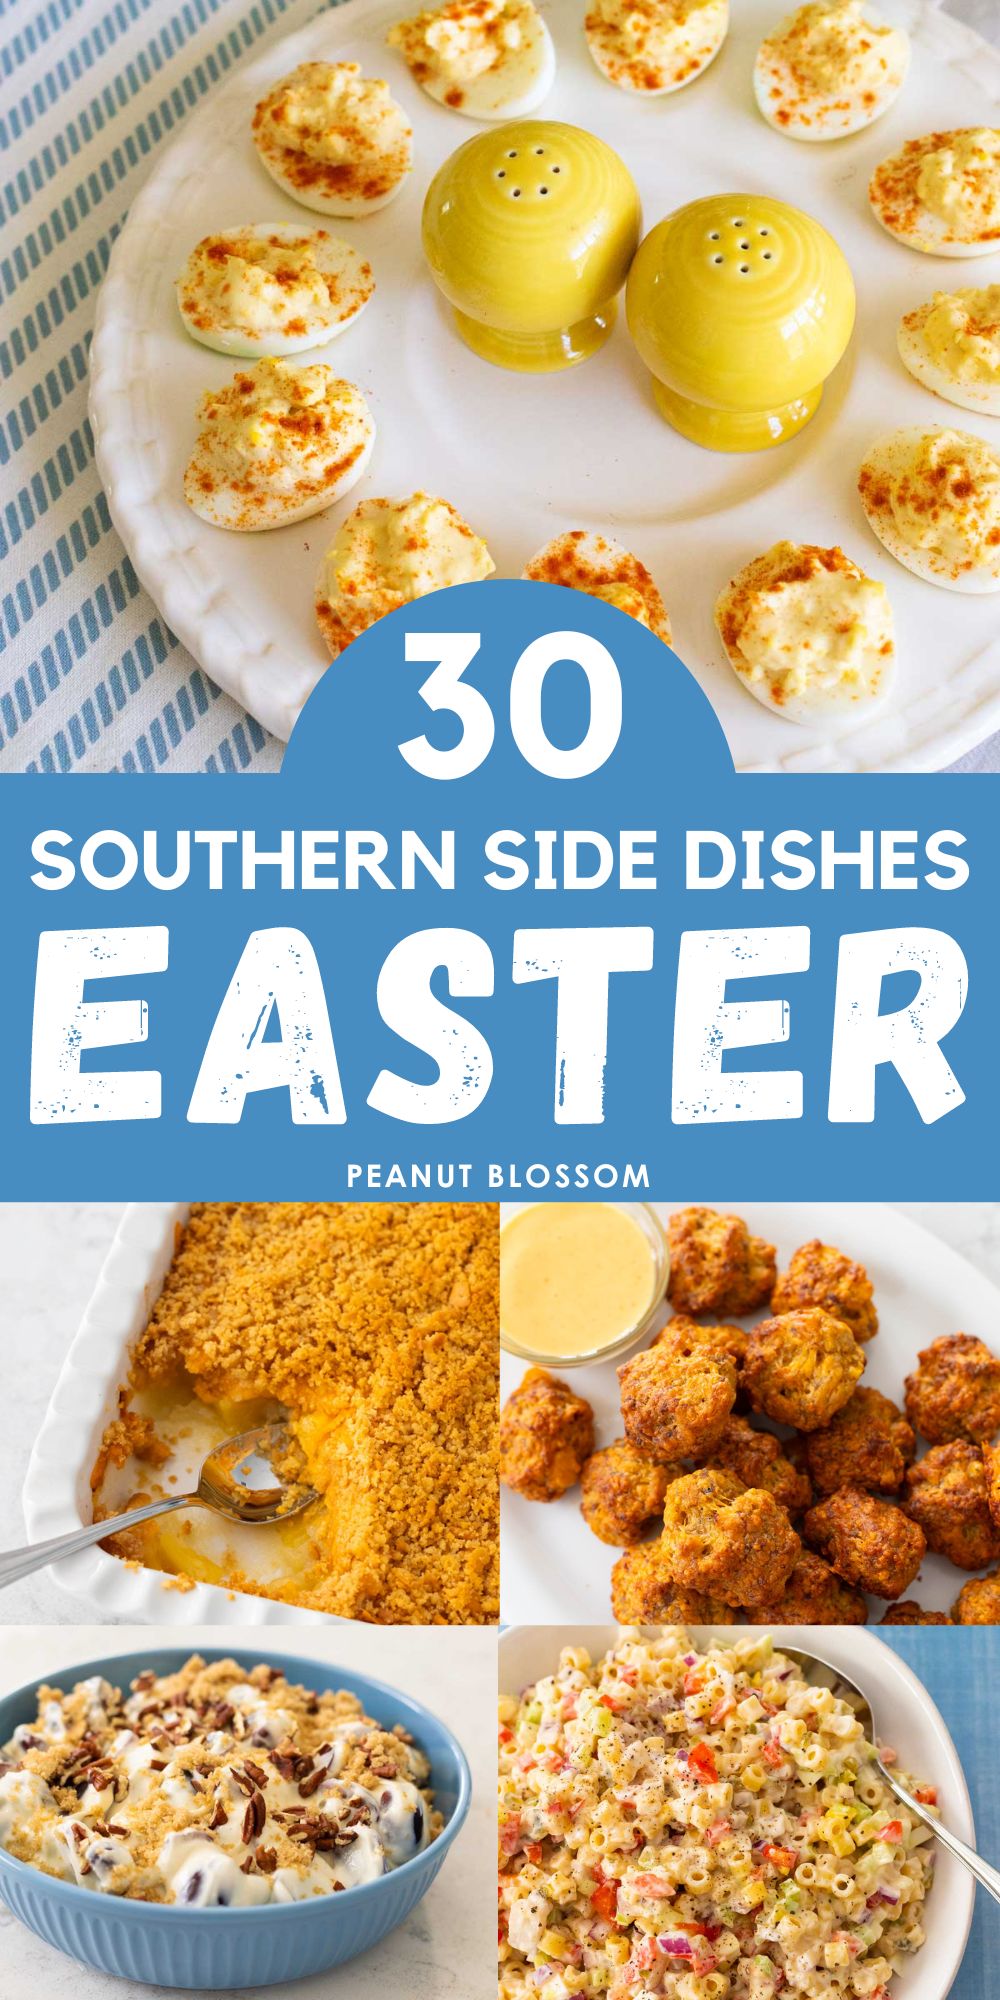 The photo collage shows several classic Southern Easter Side dishes including macaroni salad, pineapple cheese casserole, deviled eggs, and grape salad.